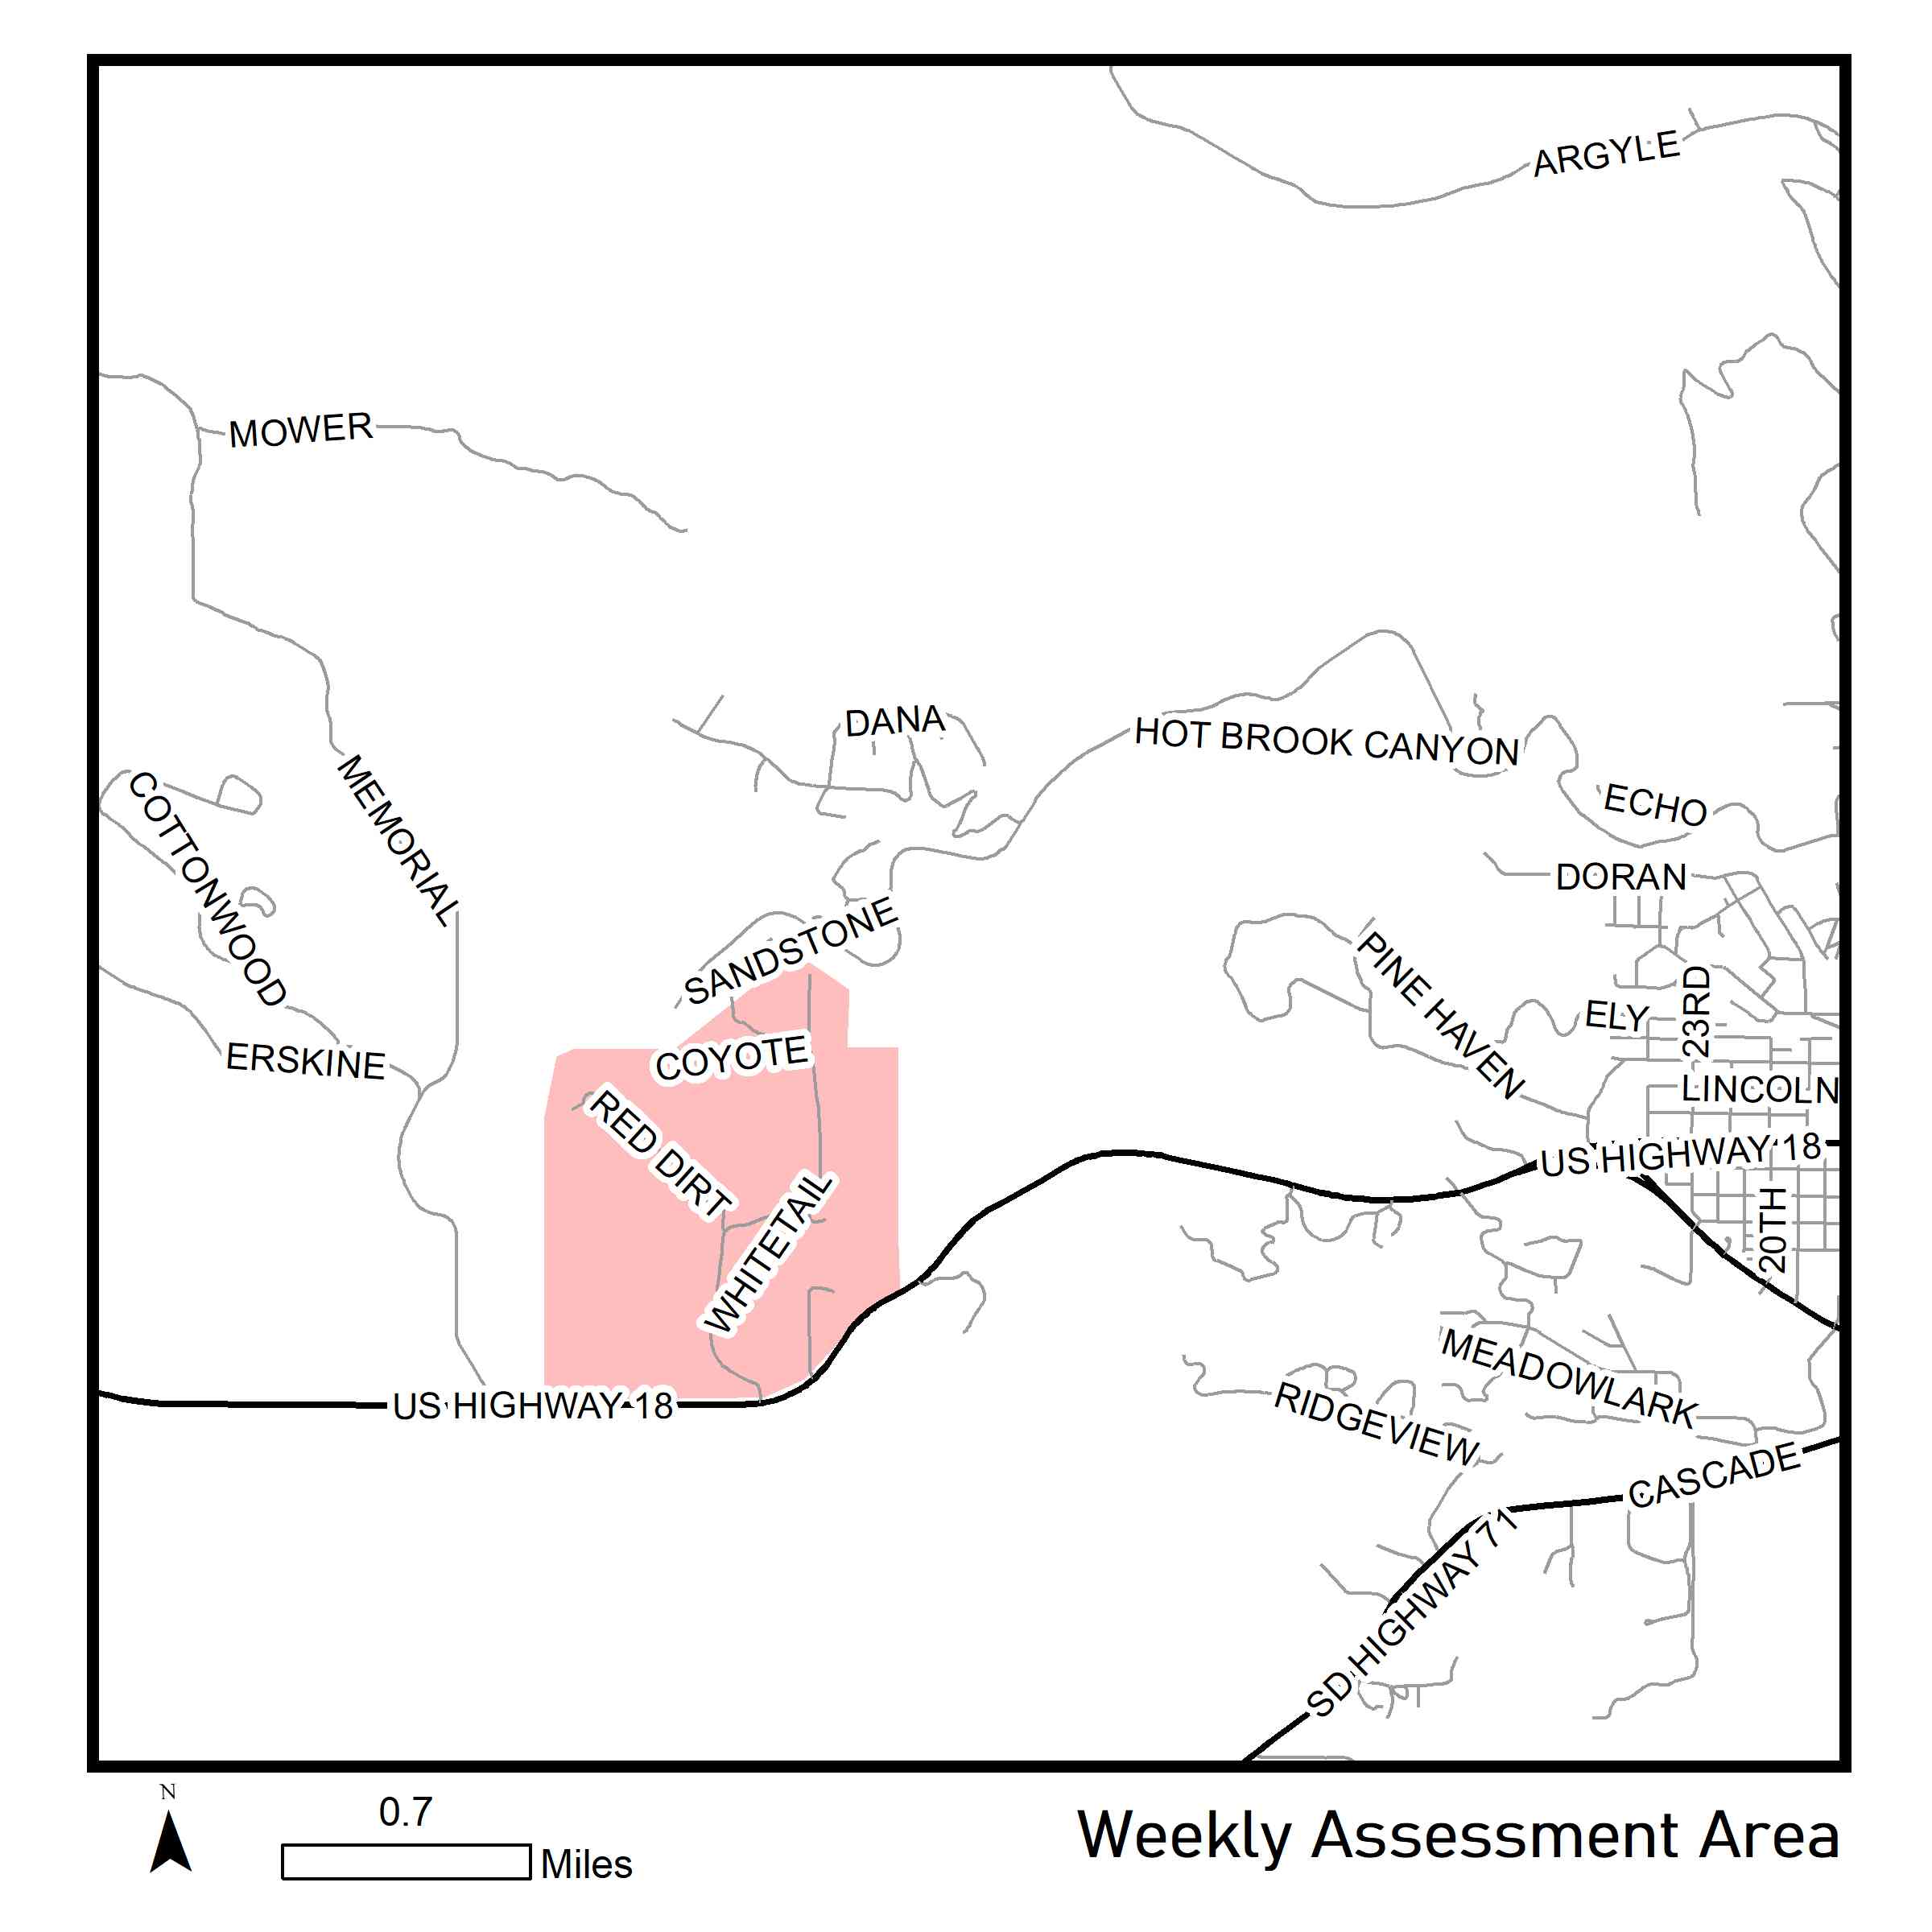 Map of assessment area for week of August 10, 2020.